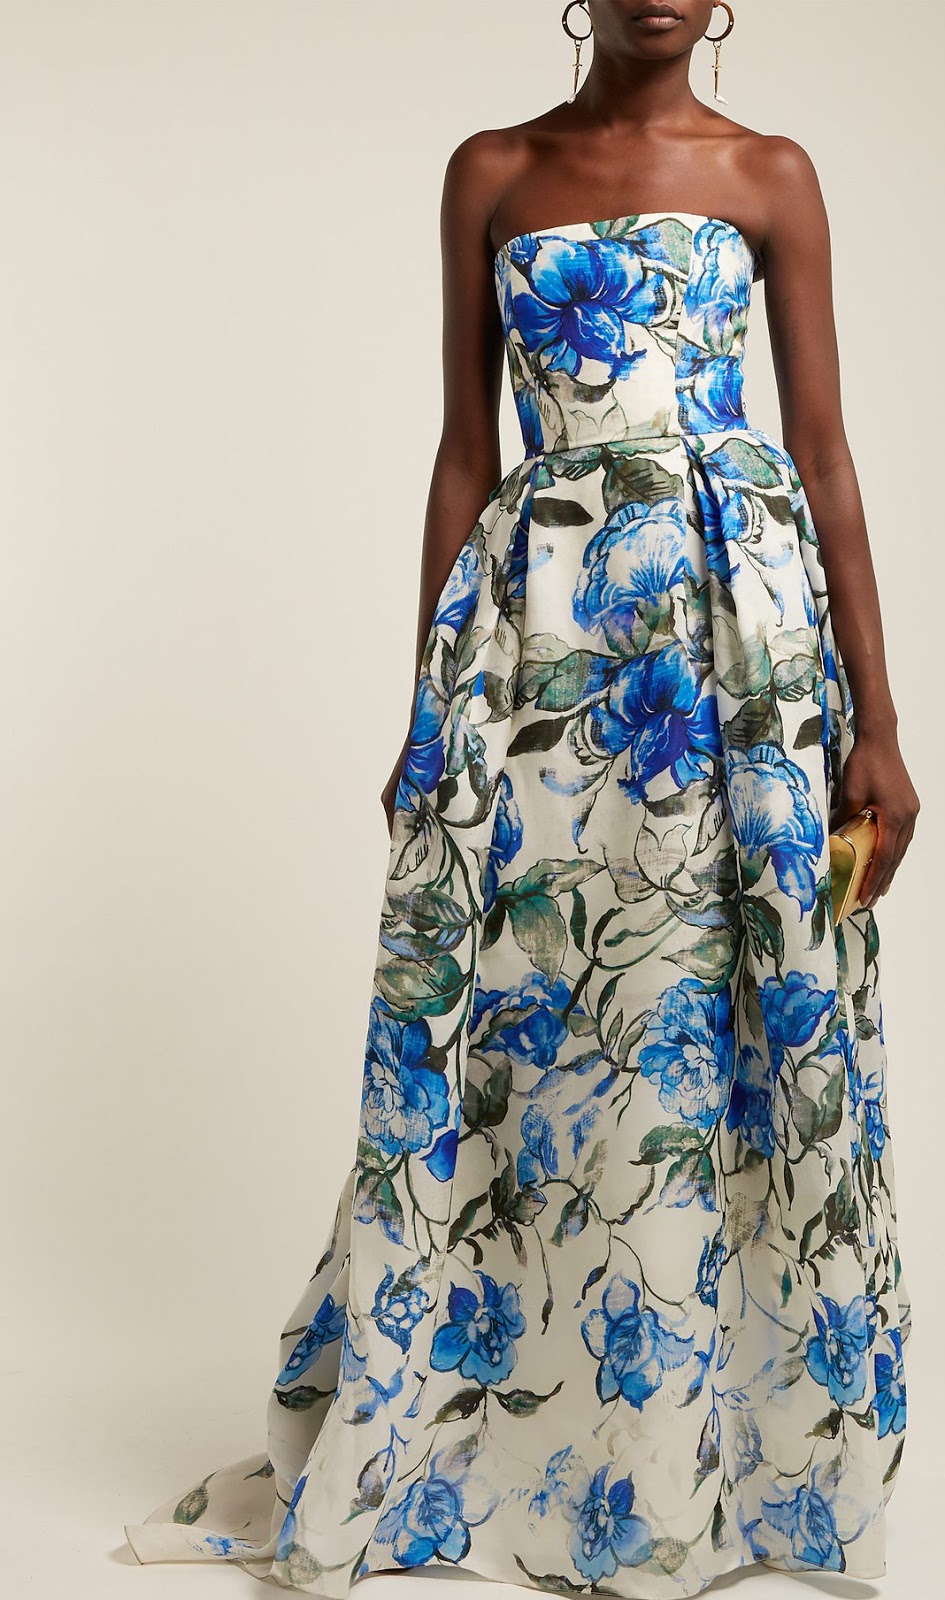 Carolina Herrera's final collection is a testament to both her ...